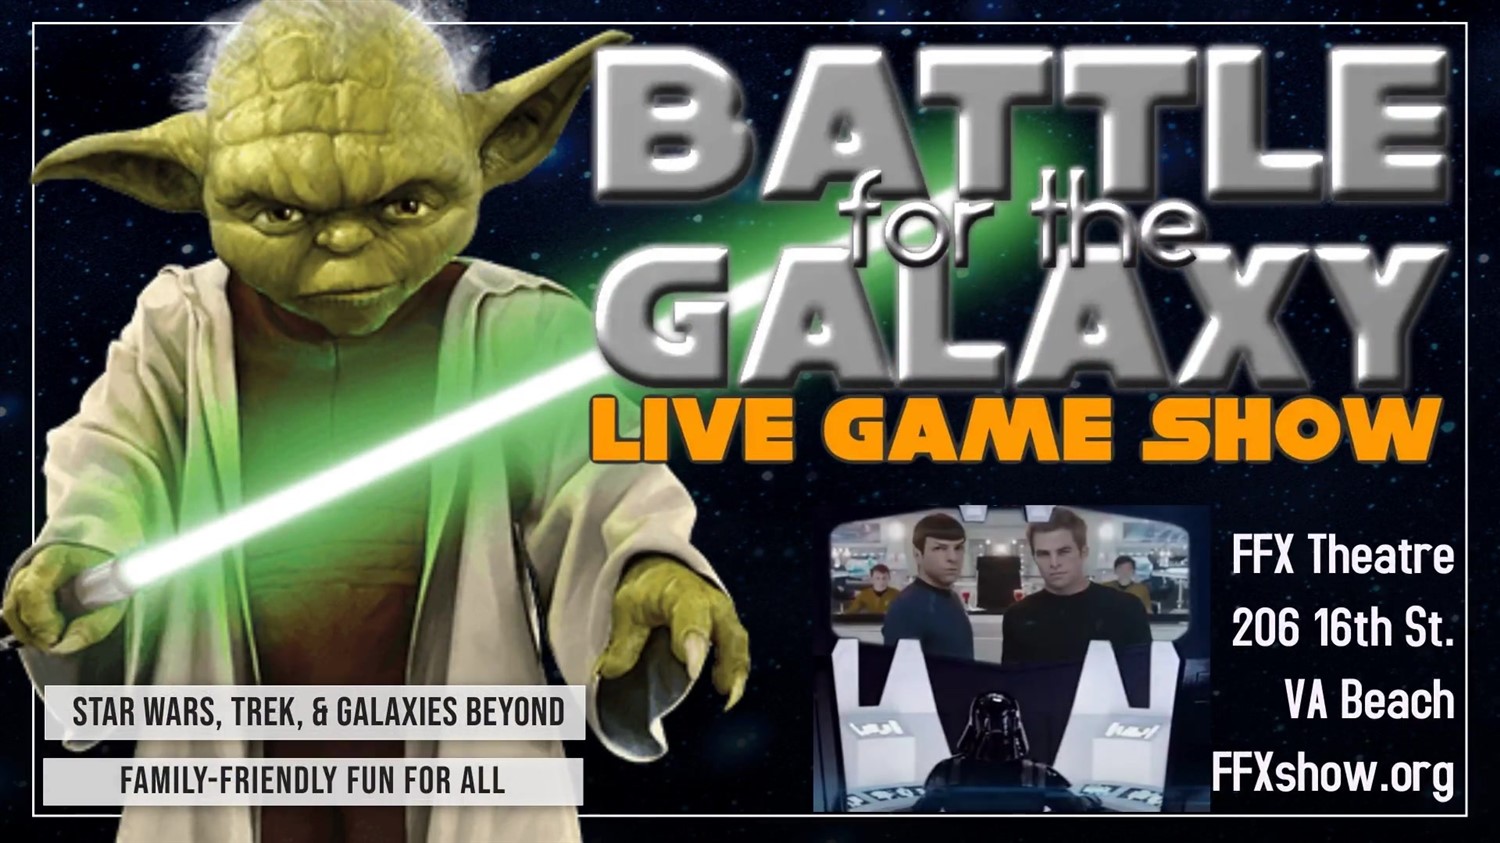 Battle for the Galaxy: LIVE SCI-FI GAME SHOW  on Mar 08, 19:00@FFX Theatre - Buy tickets and Get information on Family Fun Xperience tickets.ffxshow.org